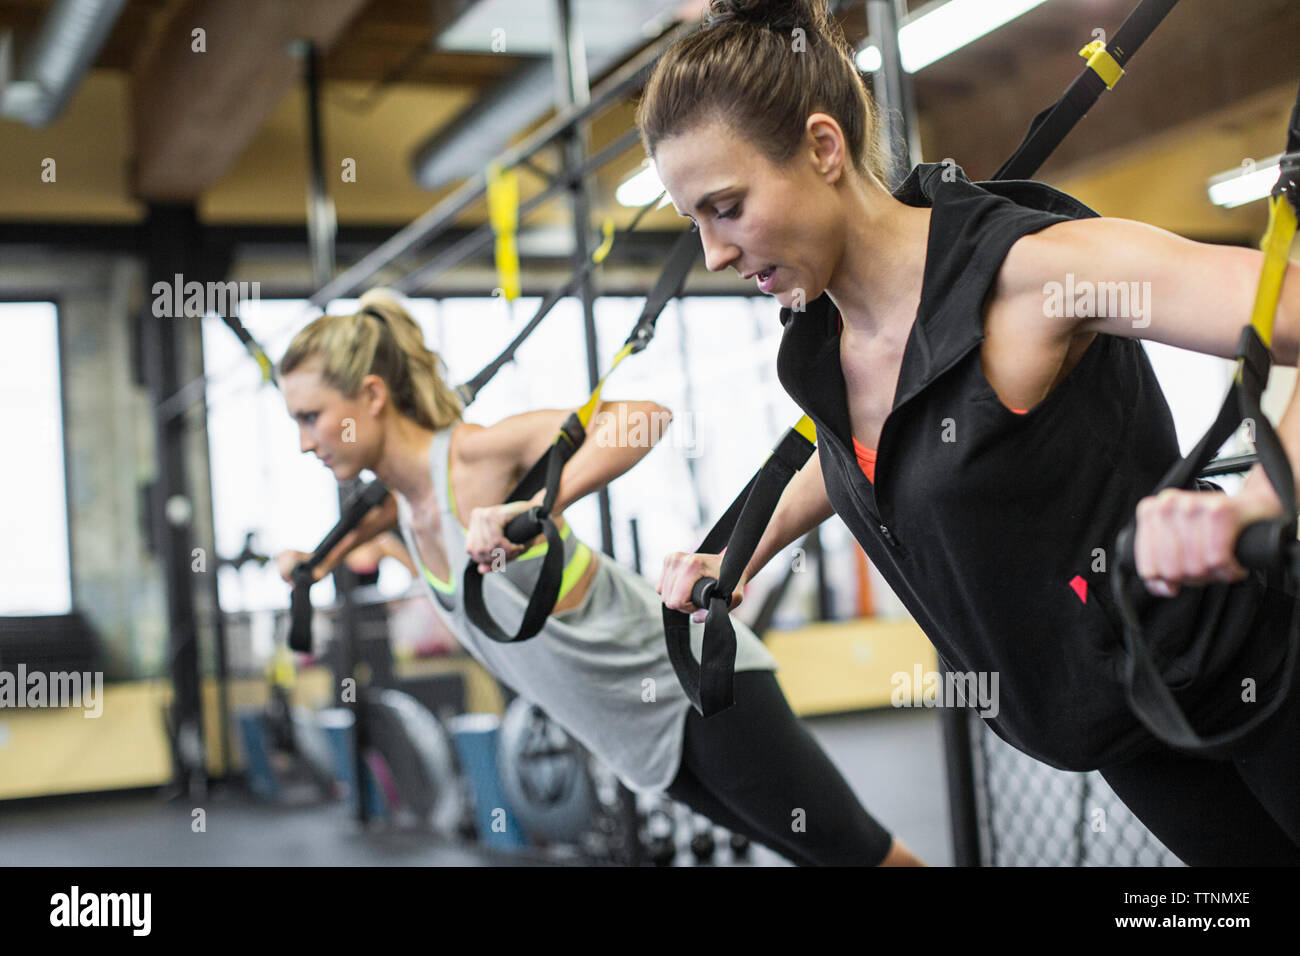 Instructor with woman exercising with resistance bands in gym Stock Photo